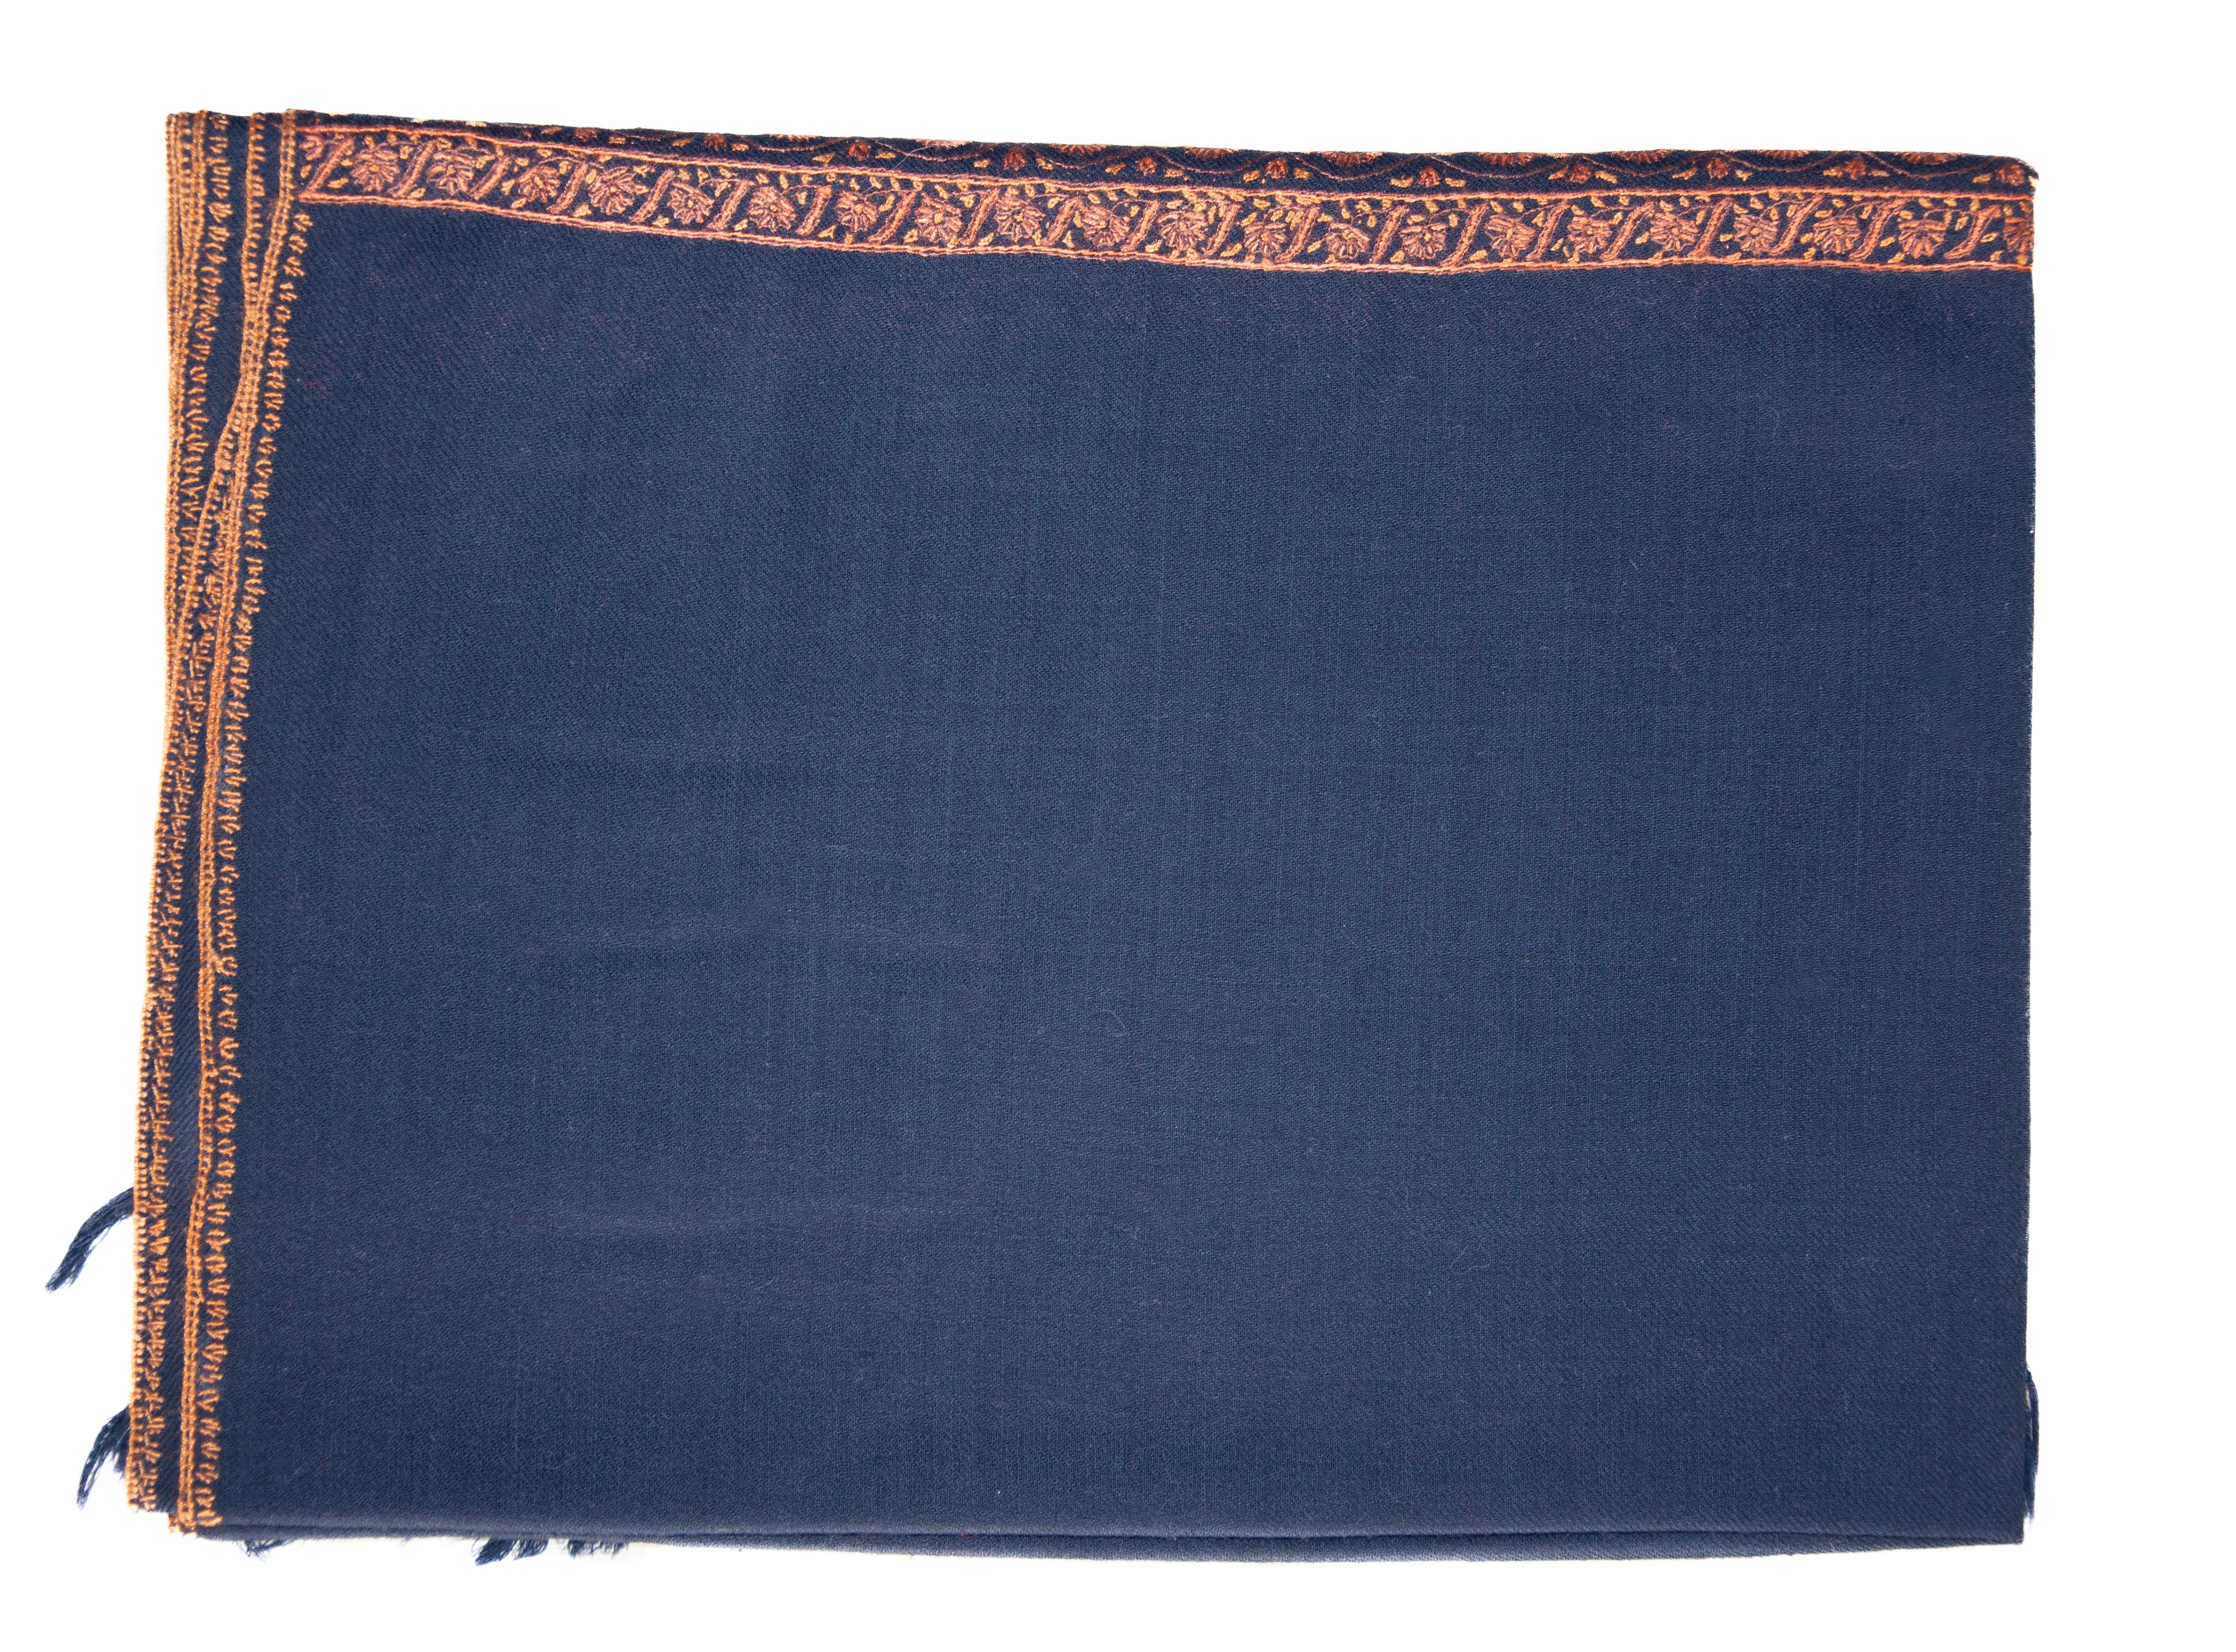 Pashmina Scarf Blue With Thick Border